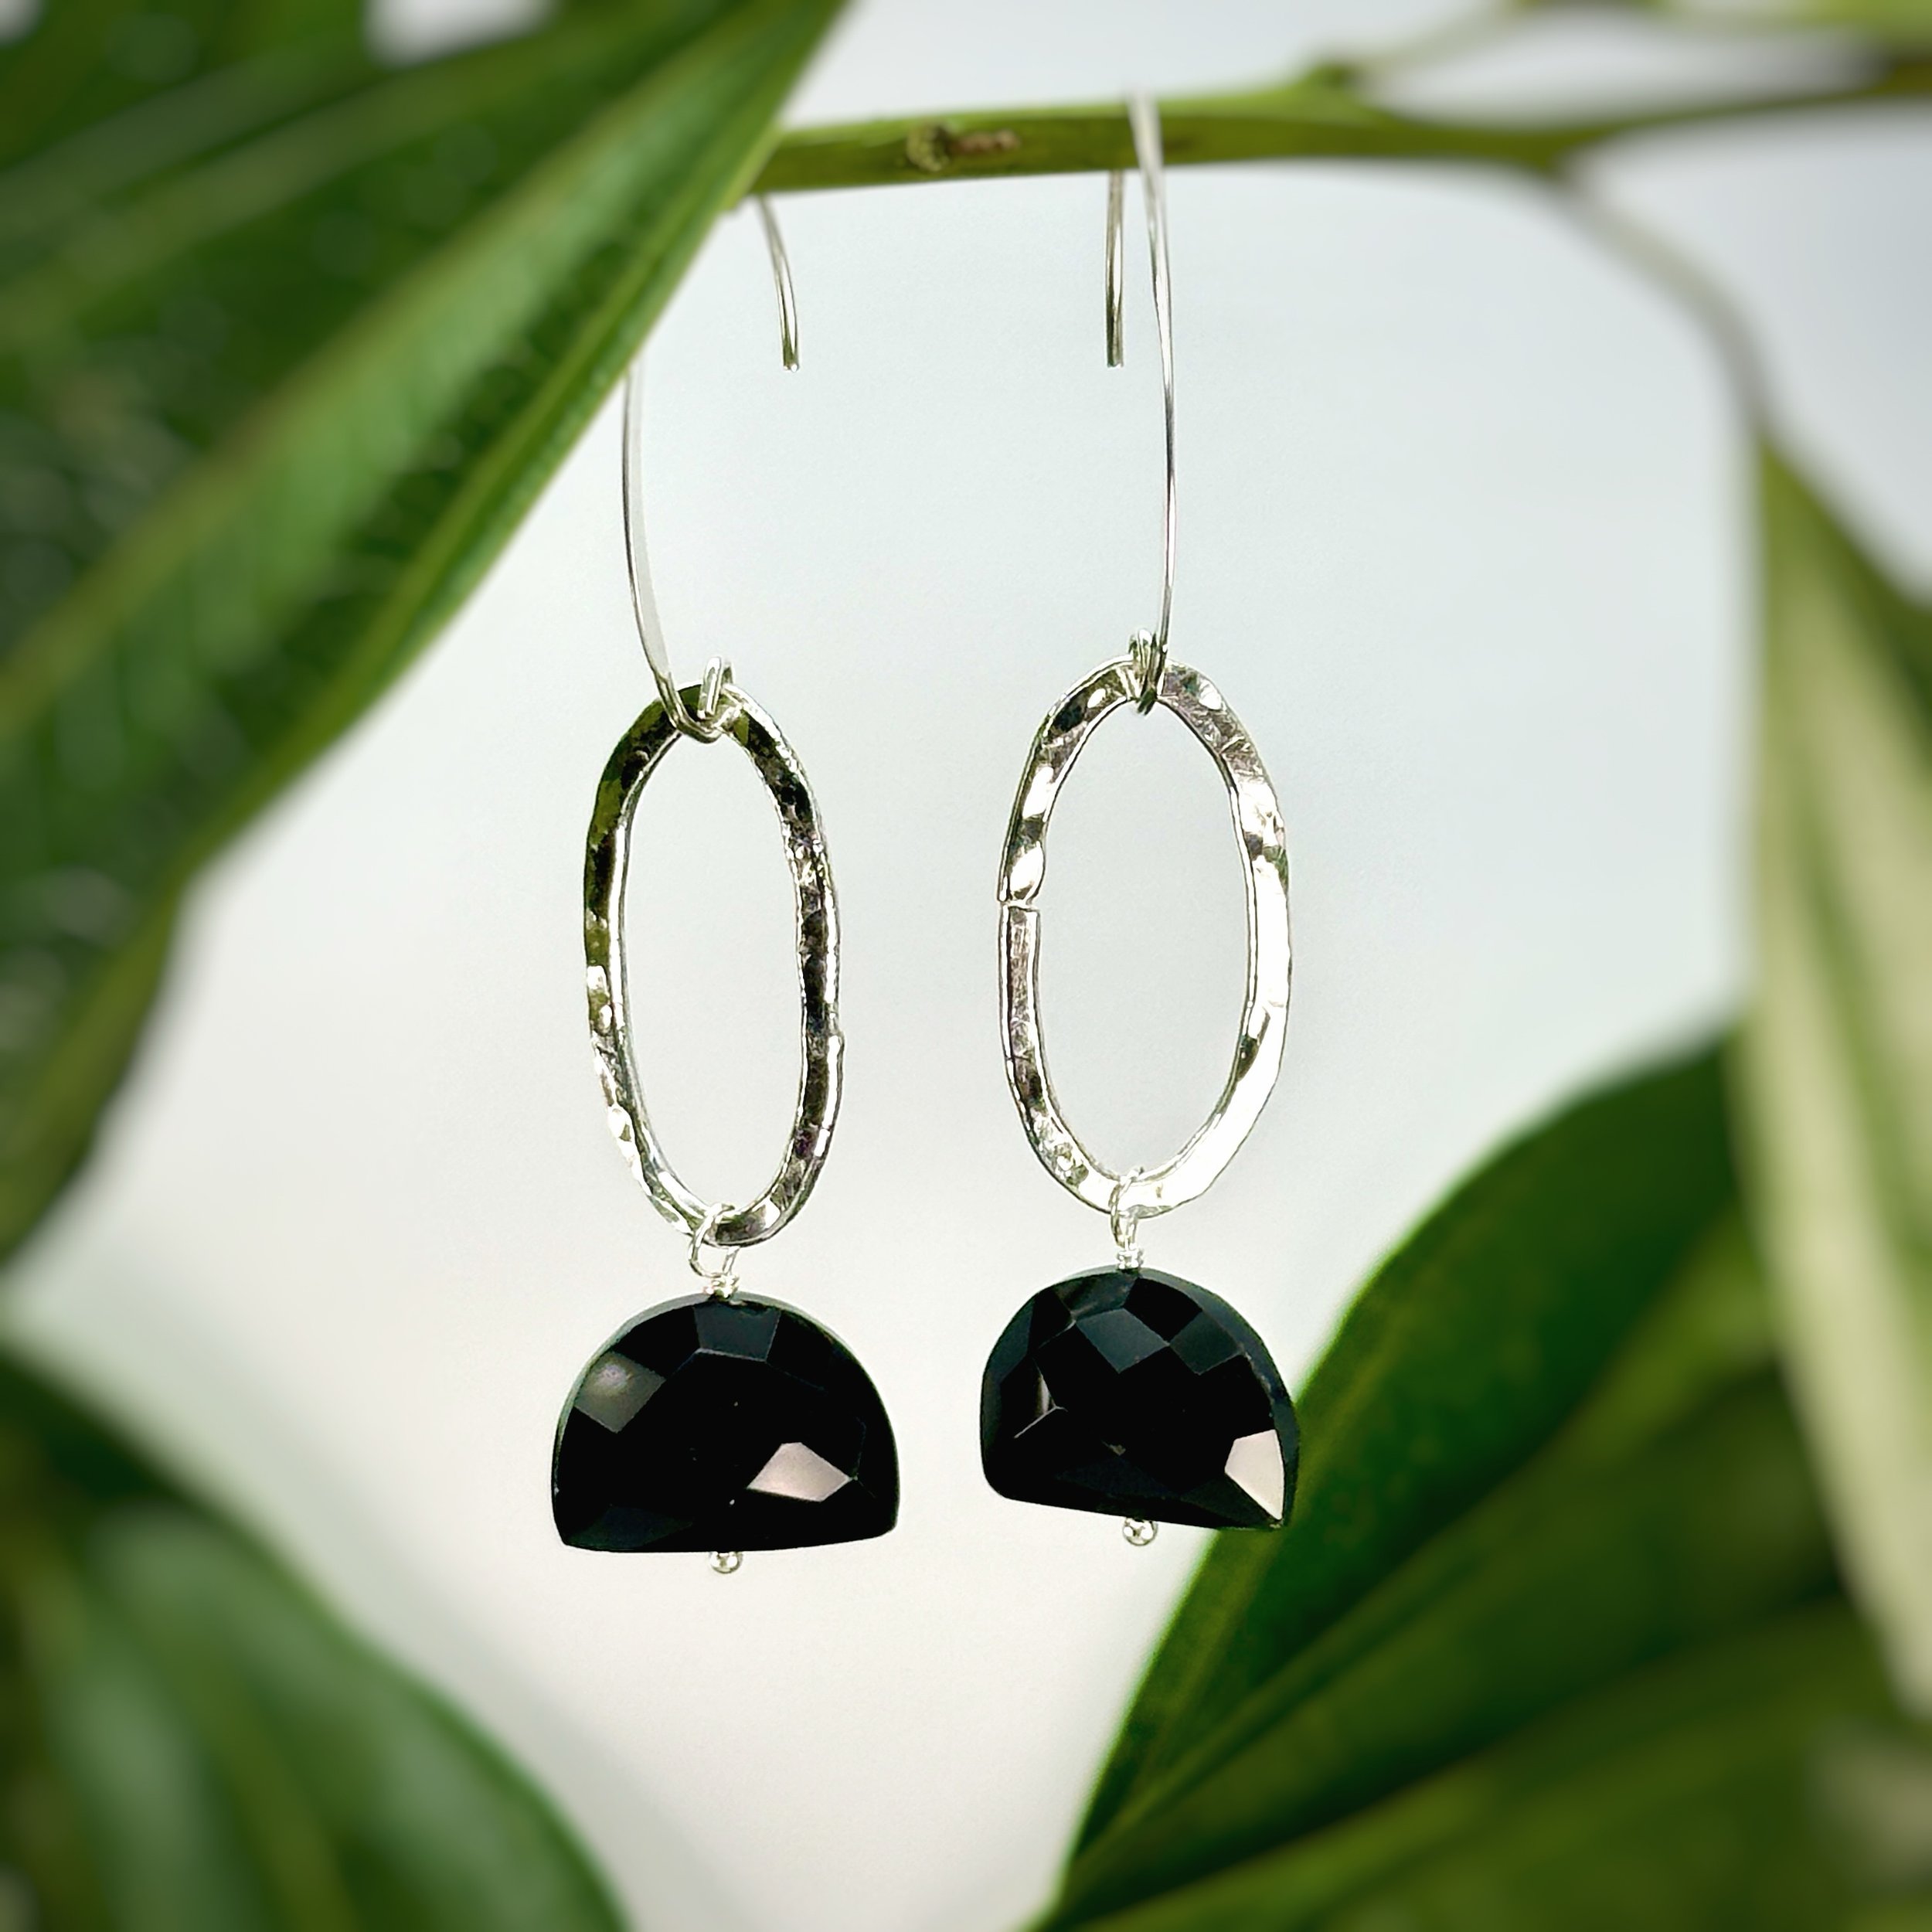 Ooooohhhhh!

Black Onyx! One of my favorite semi precious stones! The half moon shape is coming together in my designs so perfectly! Adds a bit of a geometric shape, which I love to create! 

A simple earring just got crazy! 😜 

All you gem lovers..